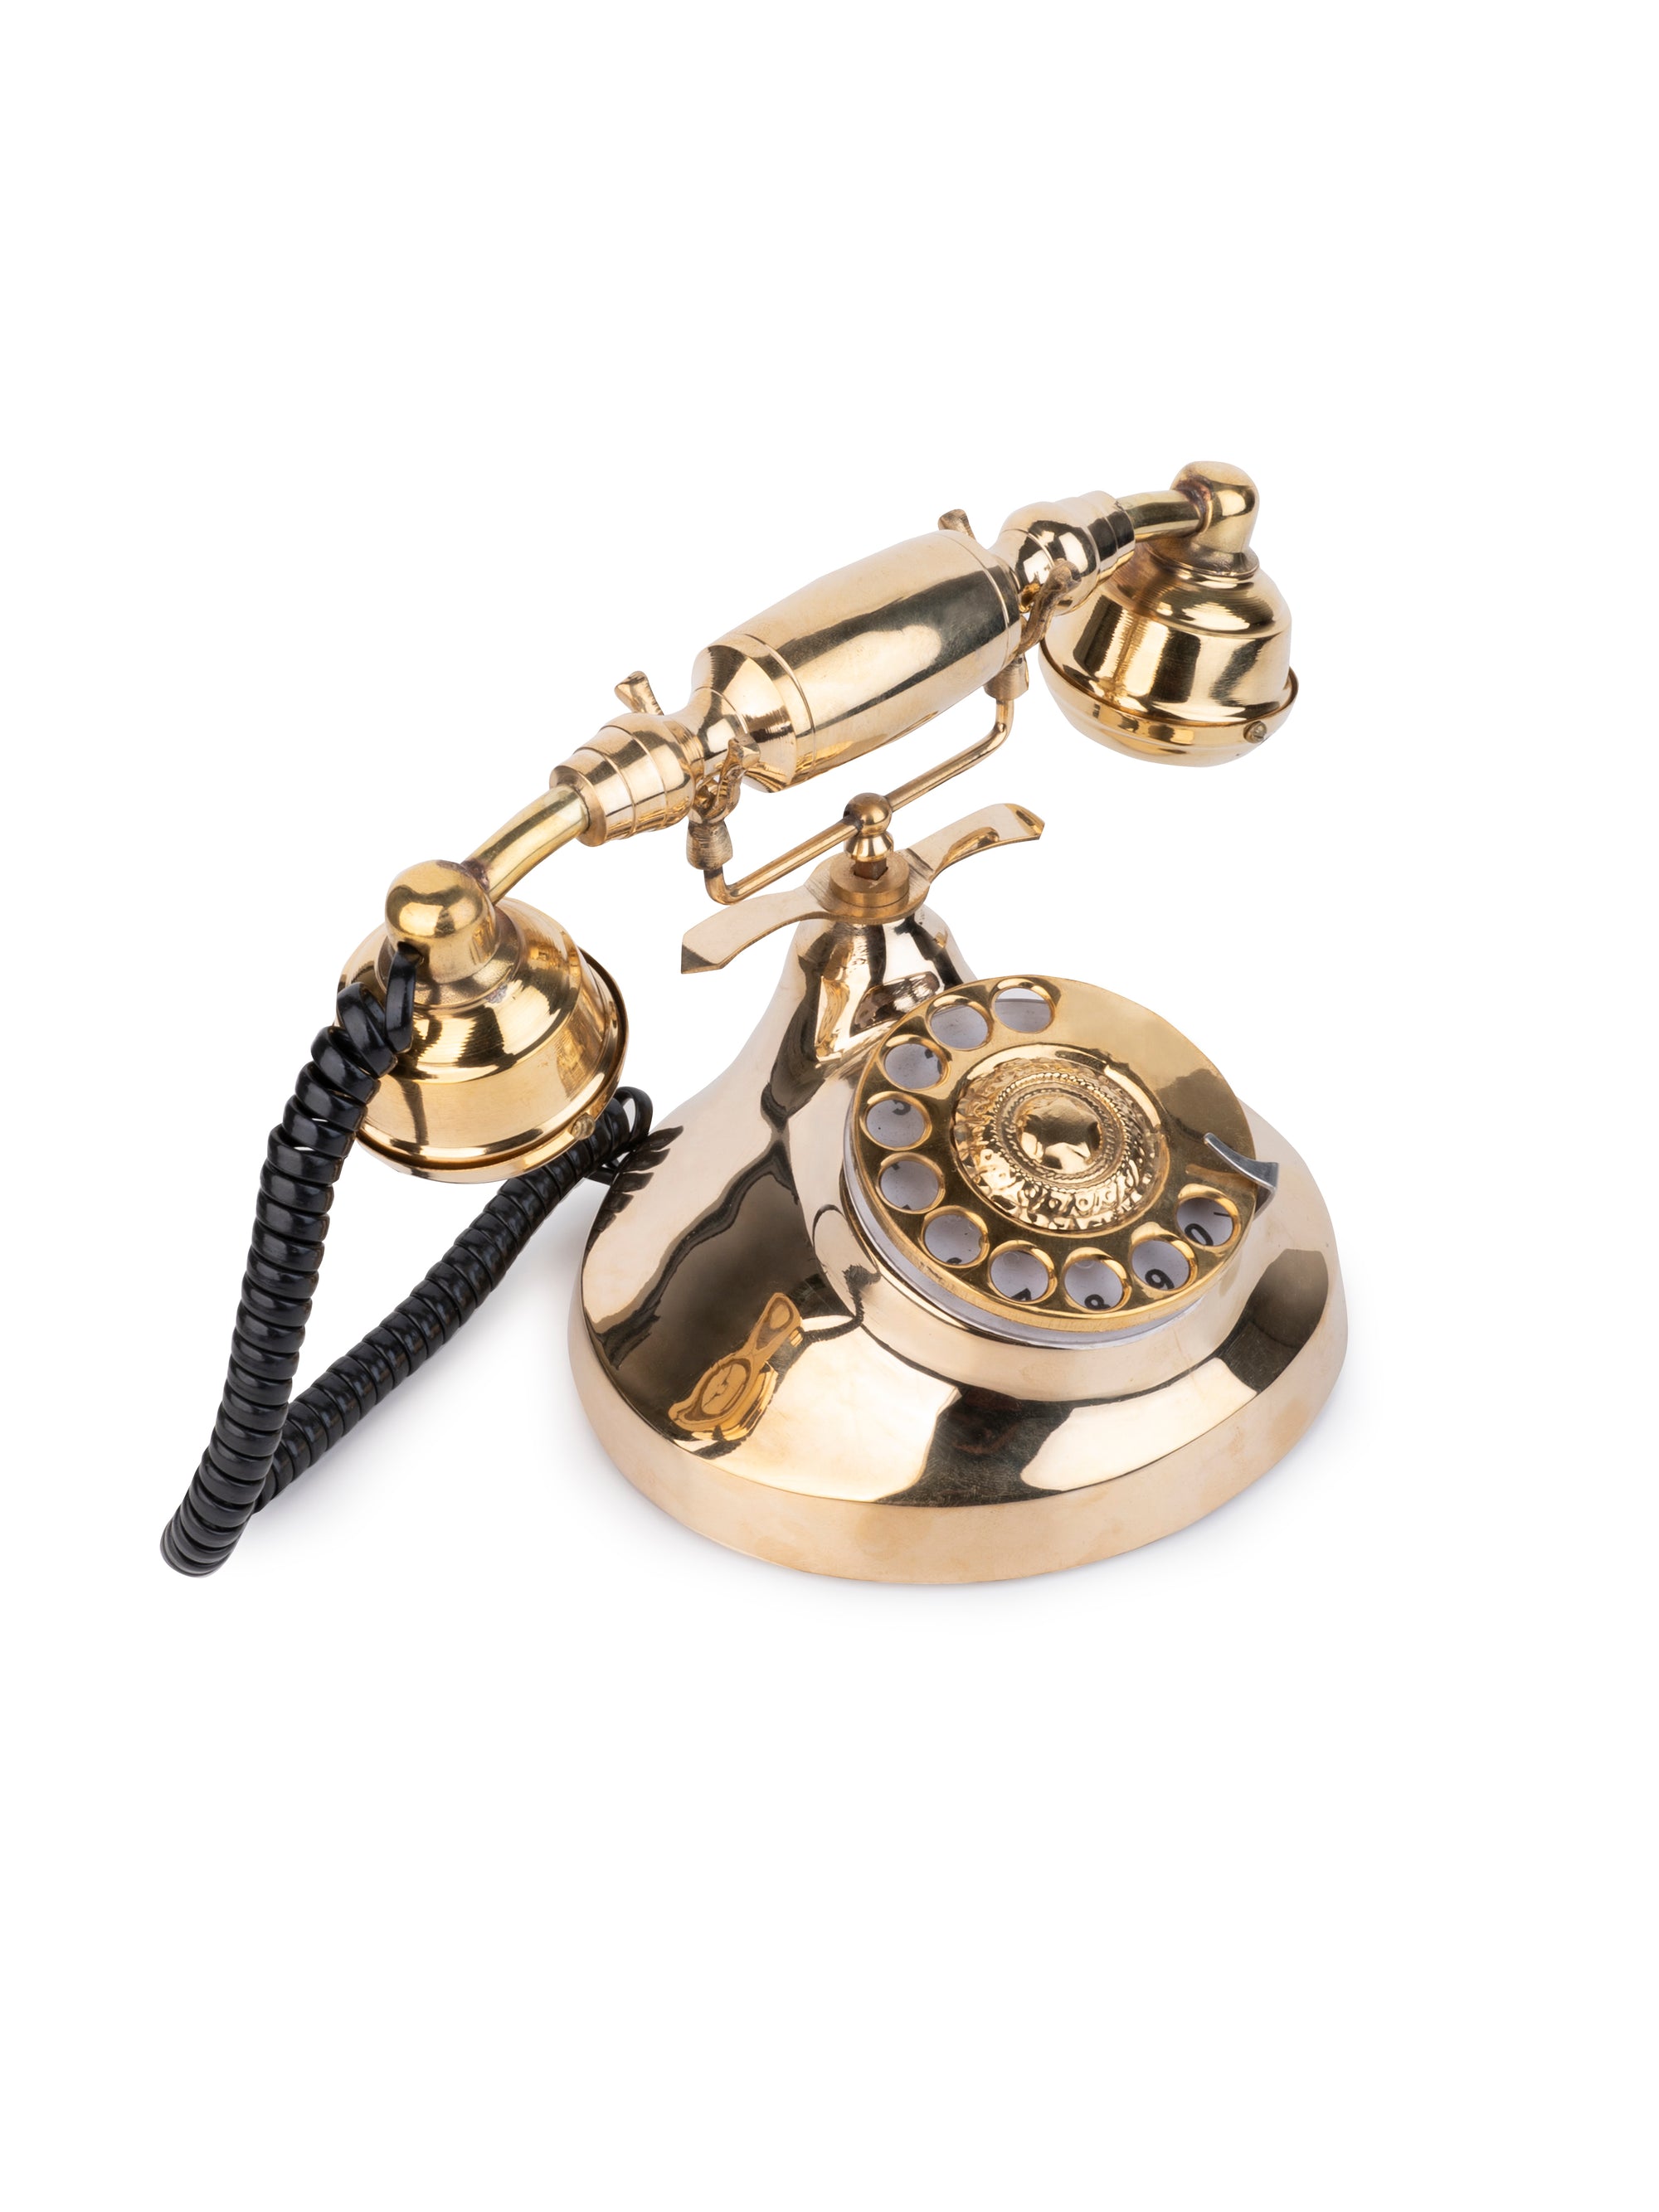 Shiny Brass Vintage Rotary Dial Landline Phone for Home Office Decor